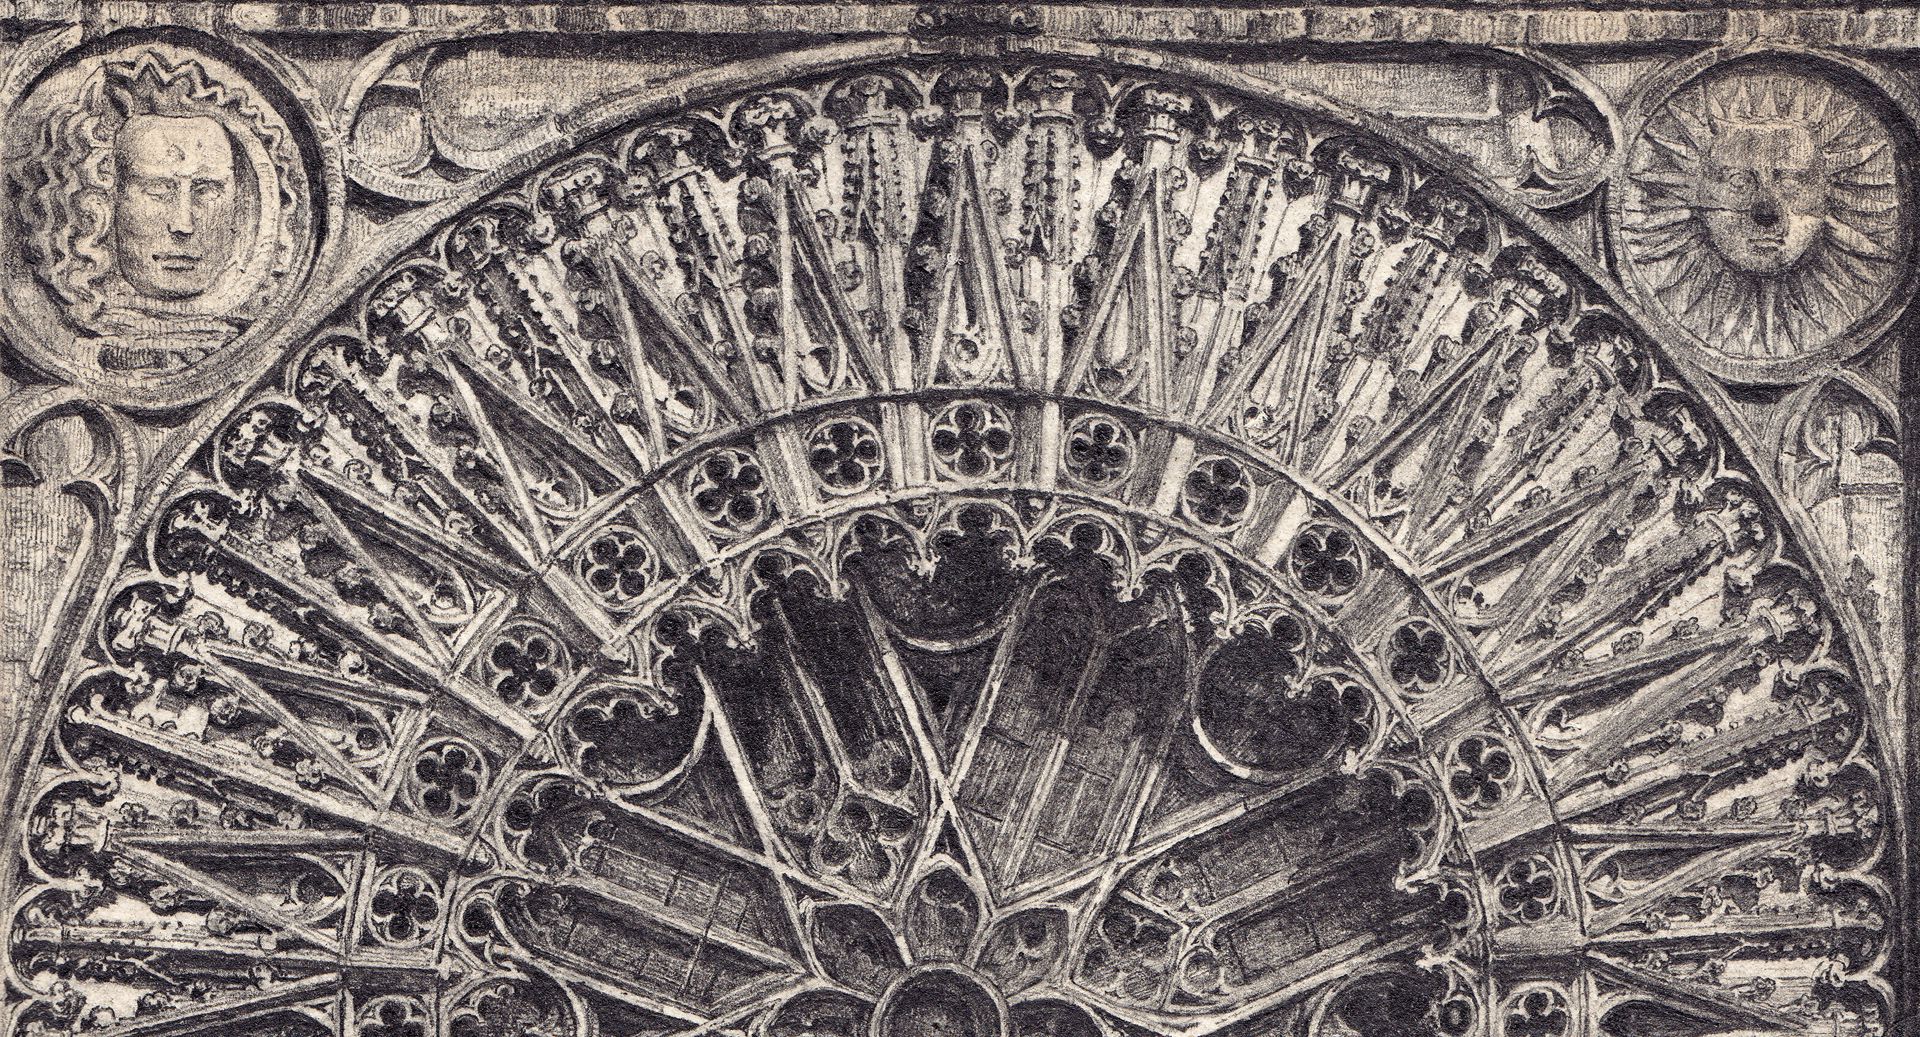 Rose window of St. Lorenz Church Detail view of the upper half